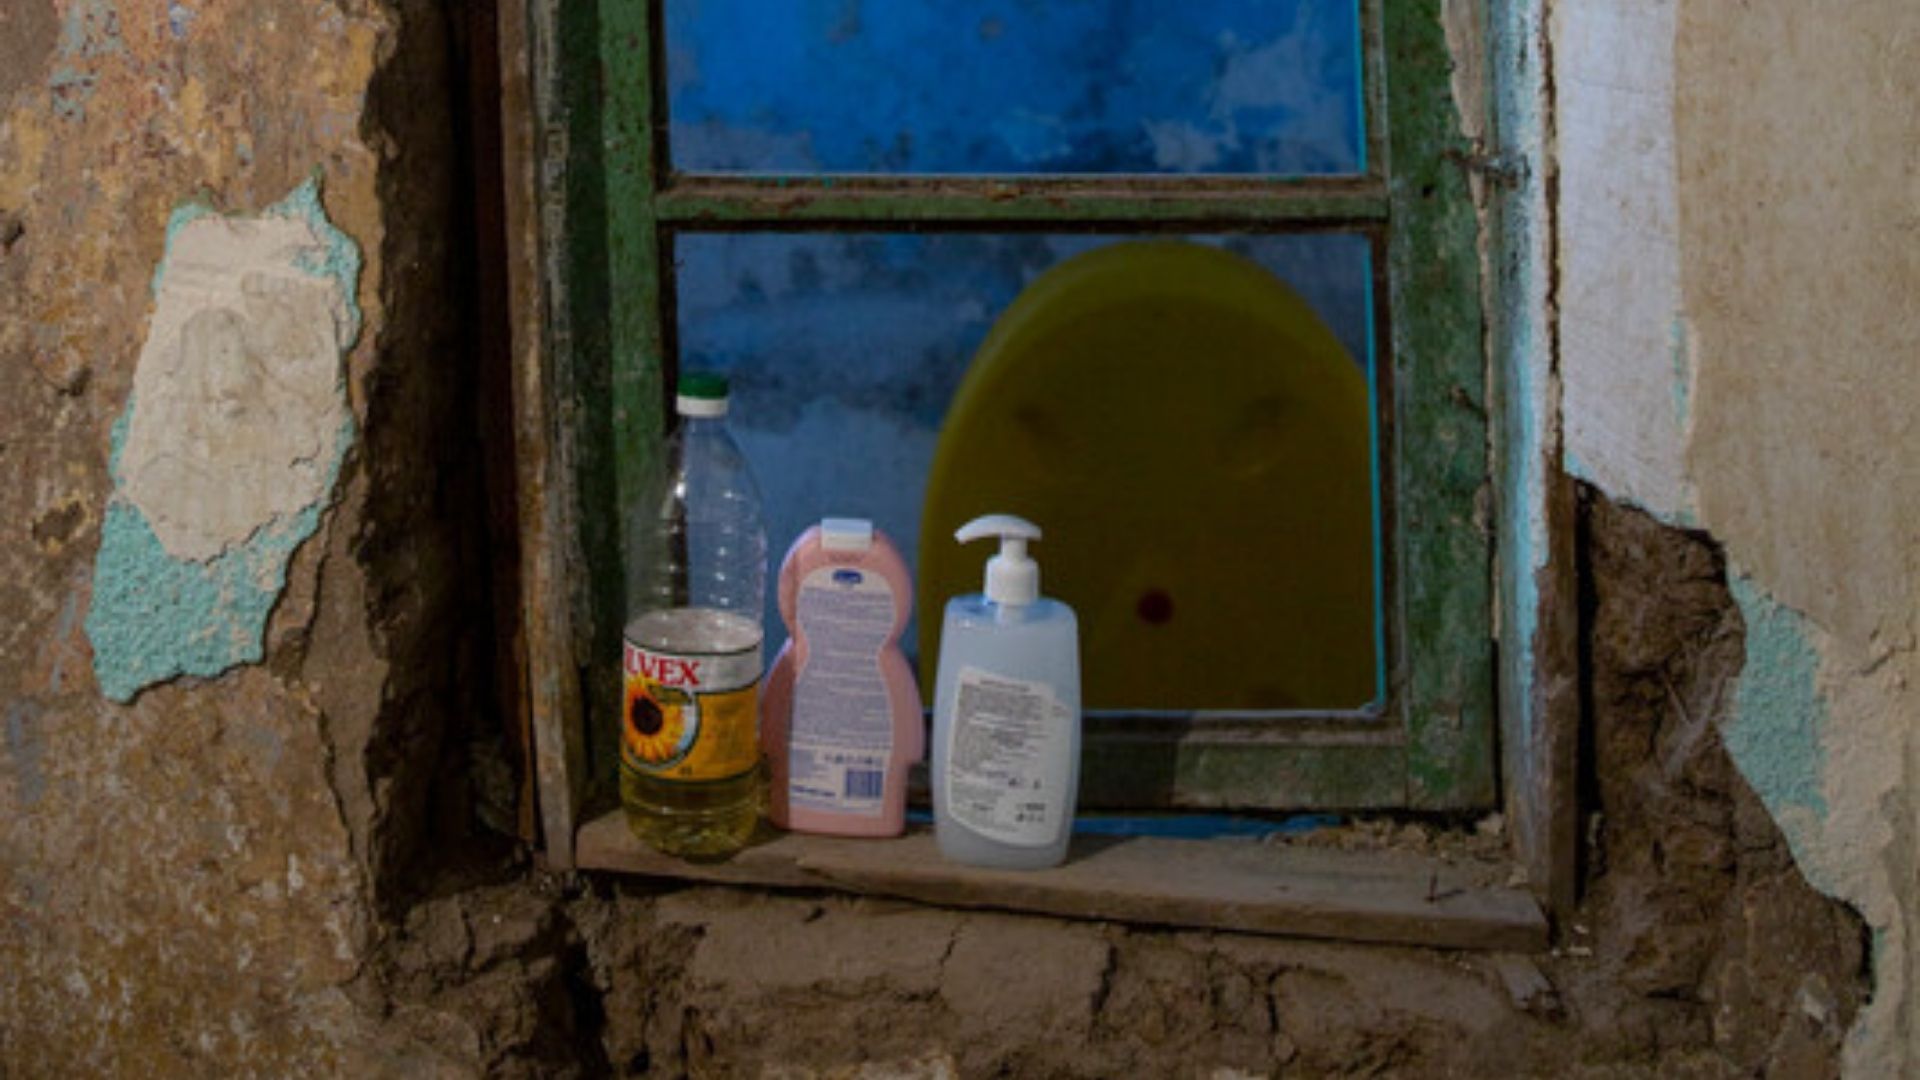 Olive oil and soap balance on the window ledge of a house in Romania. The window shows the signs of poverty.